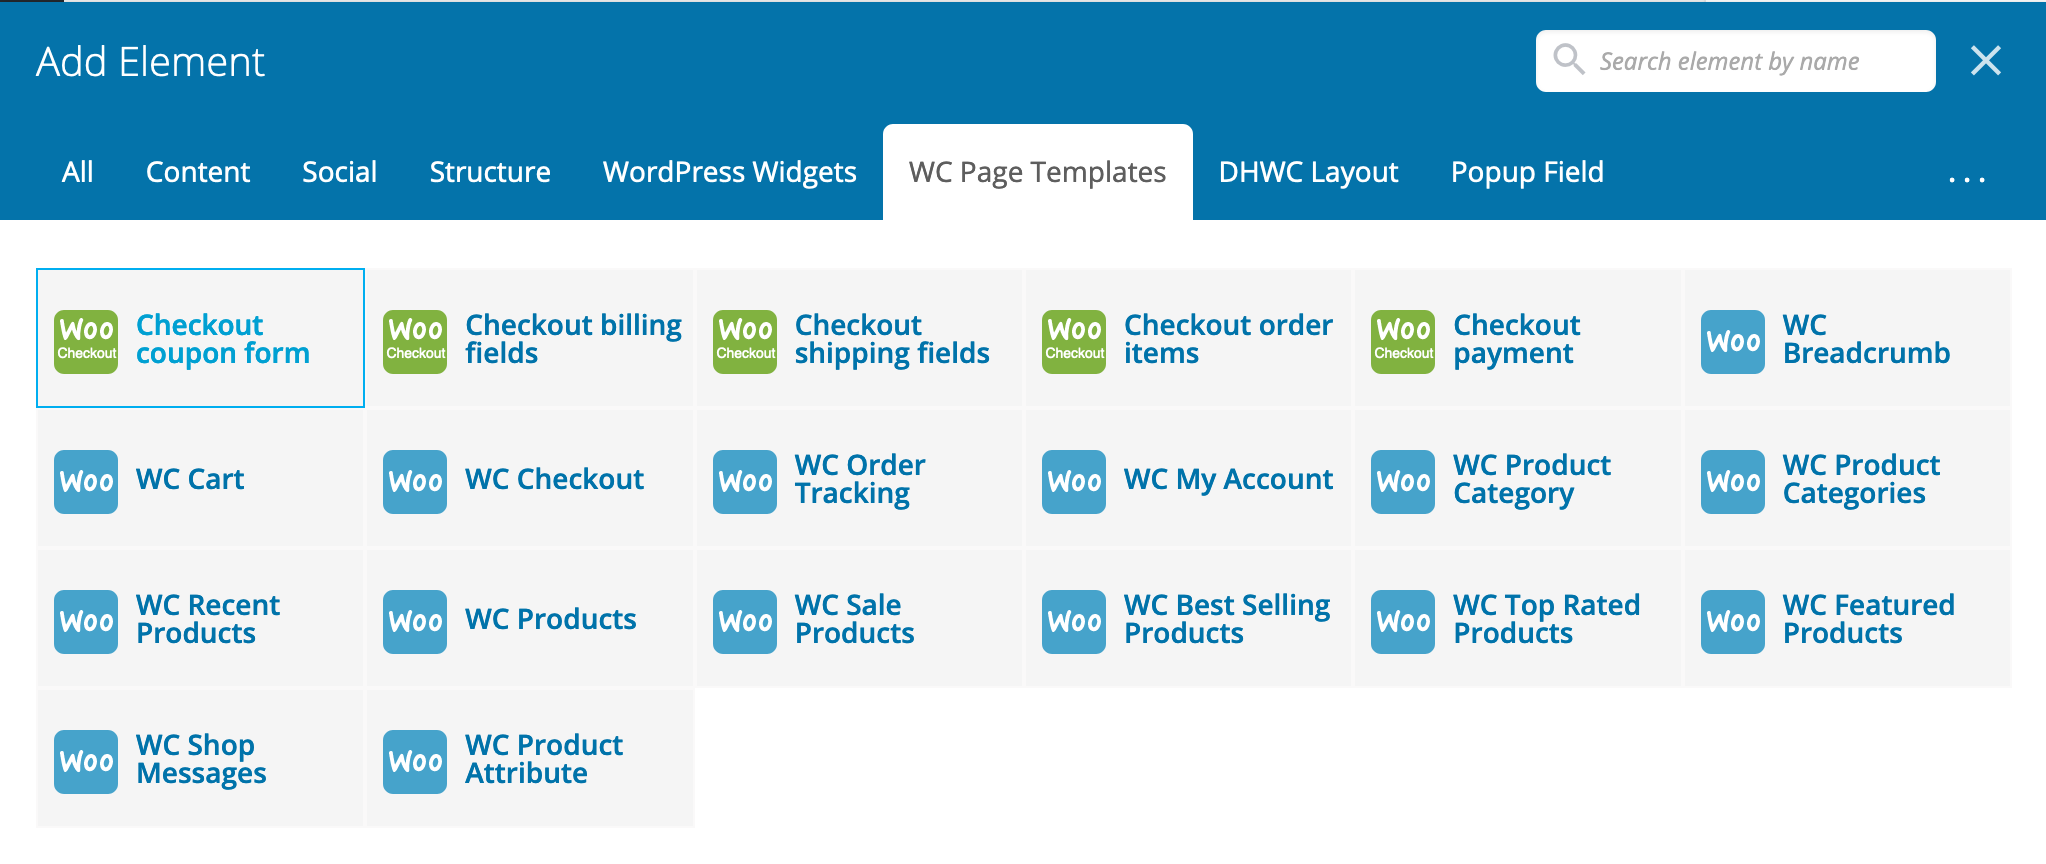 DHWCPage - WooCommerce Page Builder - 6